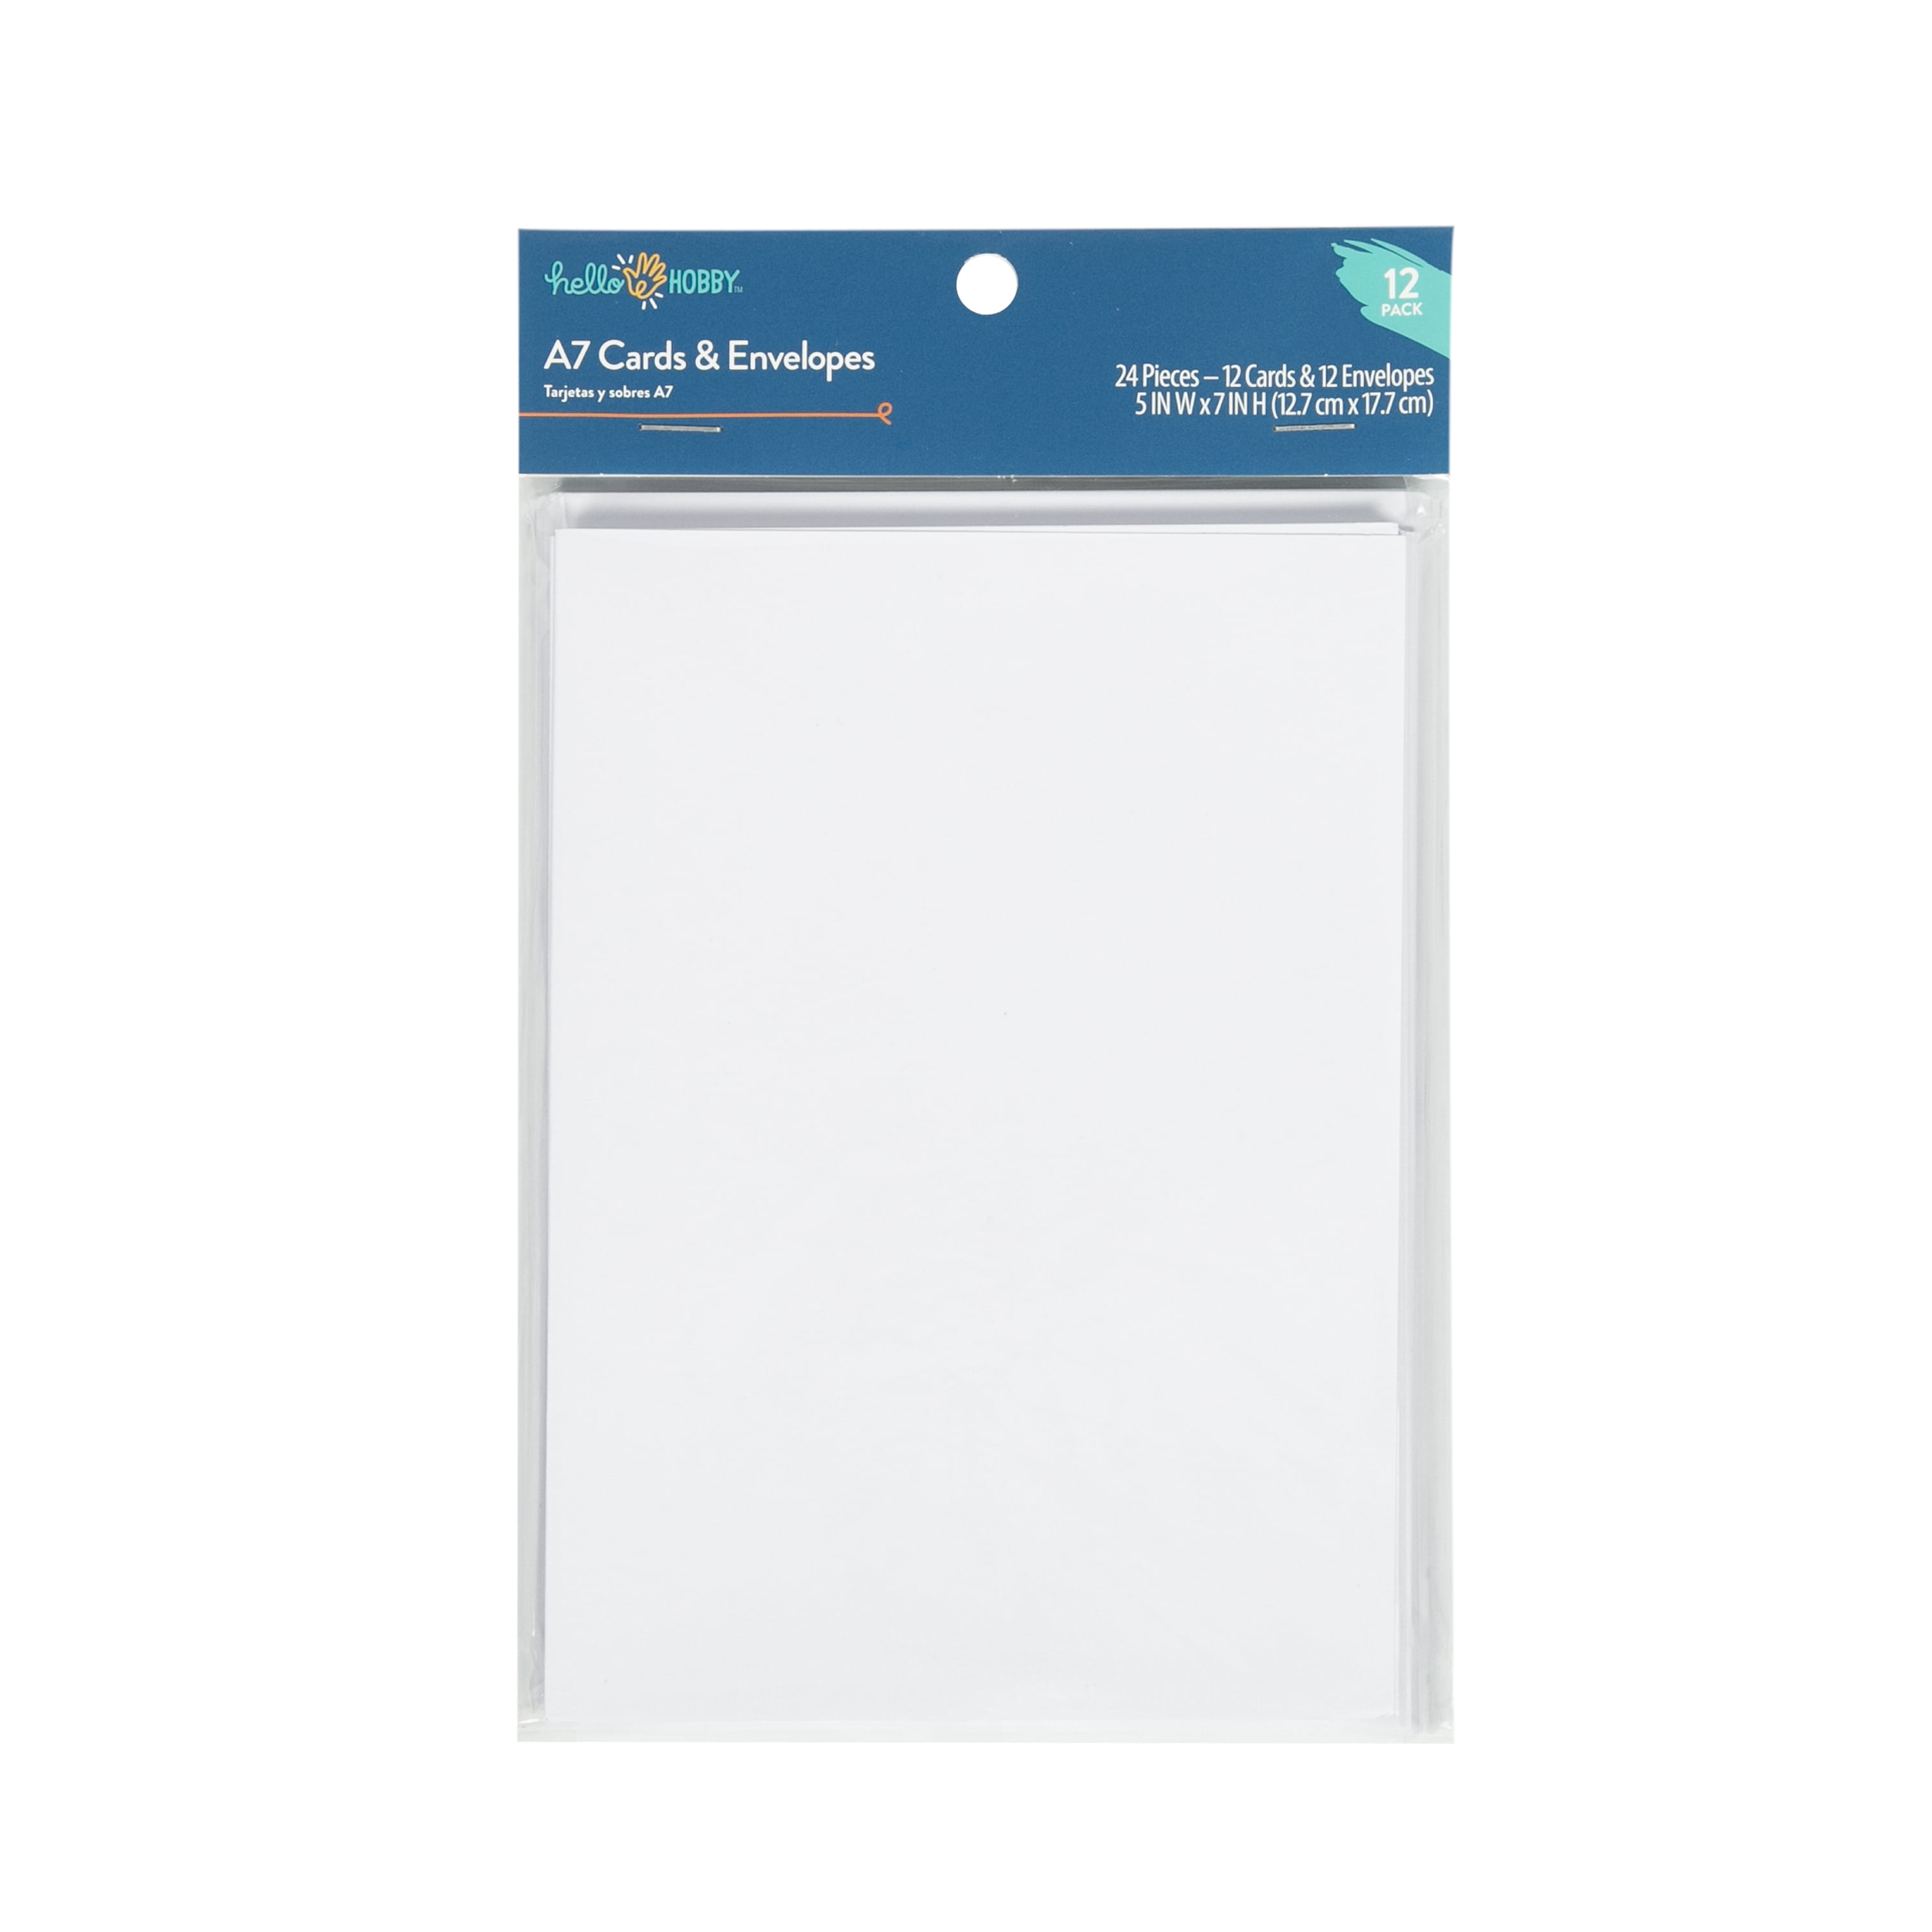 Hello Hobby A7 Blank All Occasion Greeting Cards, with Envelopes 5 inch x 7 inch (12 Count)